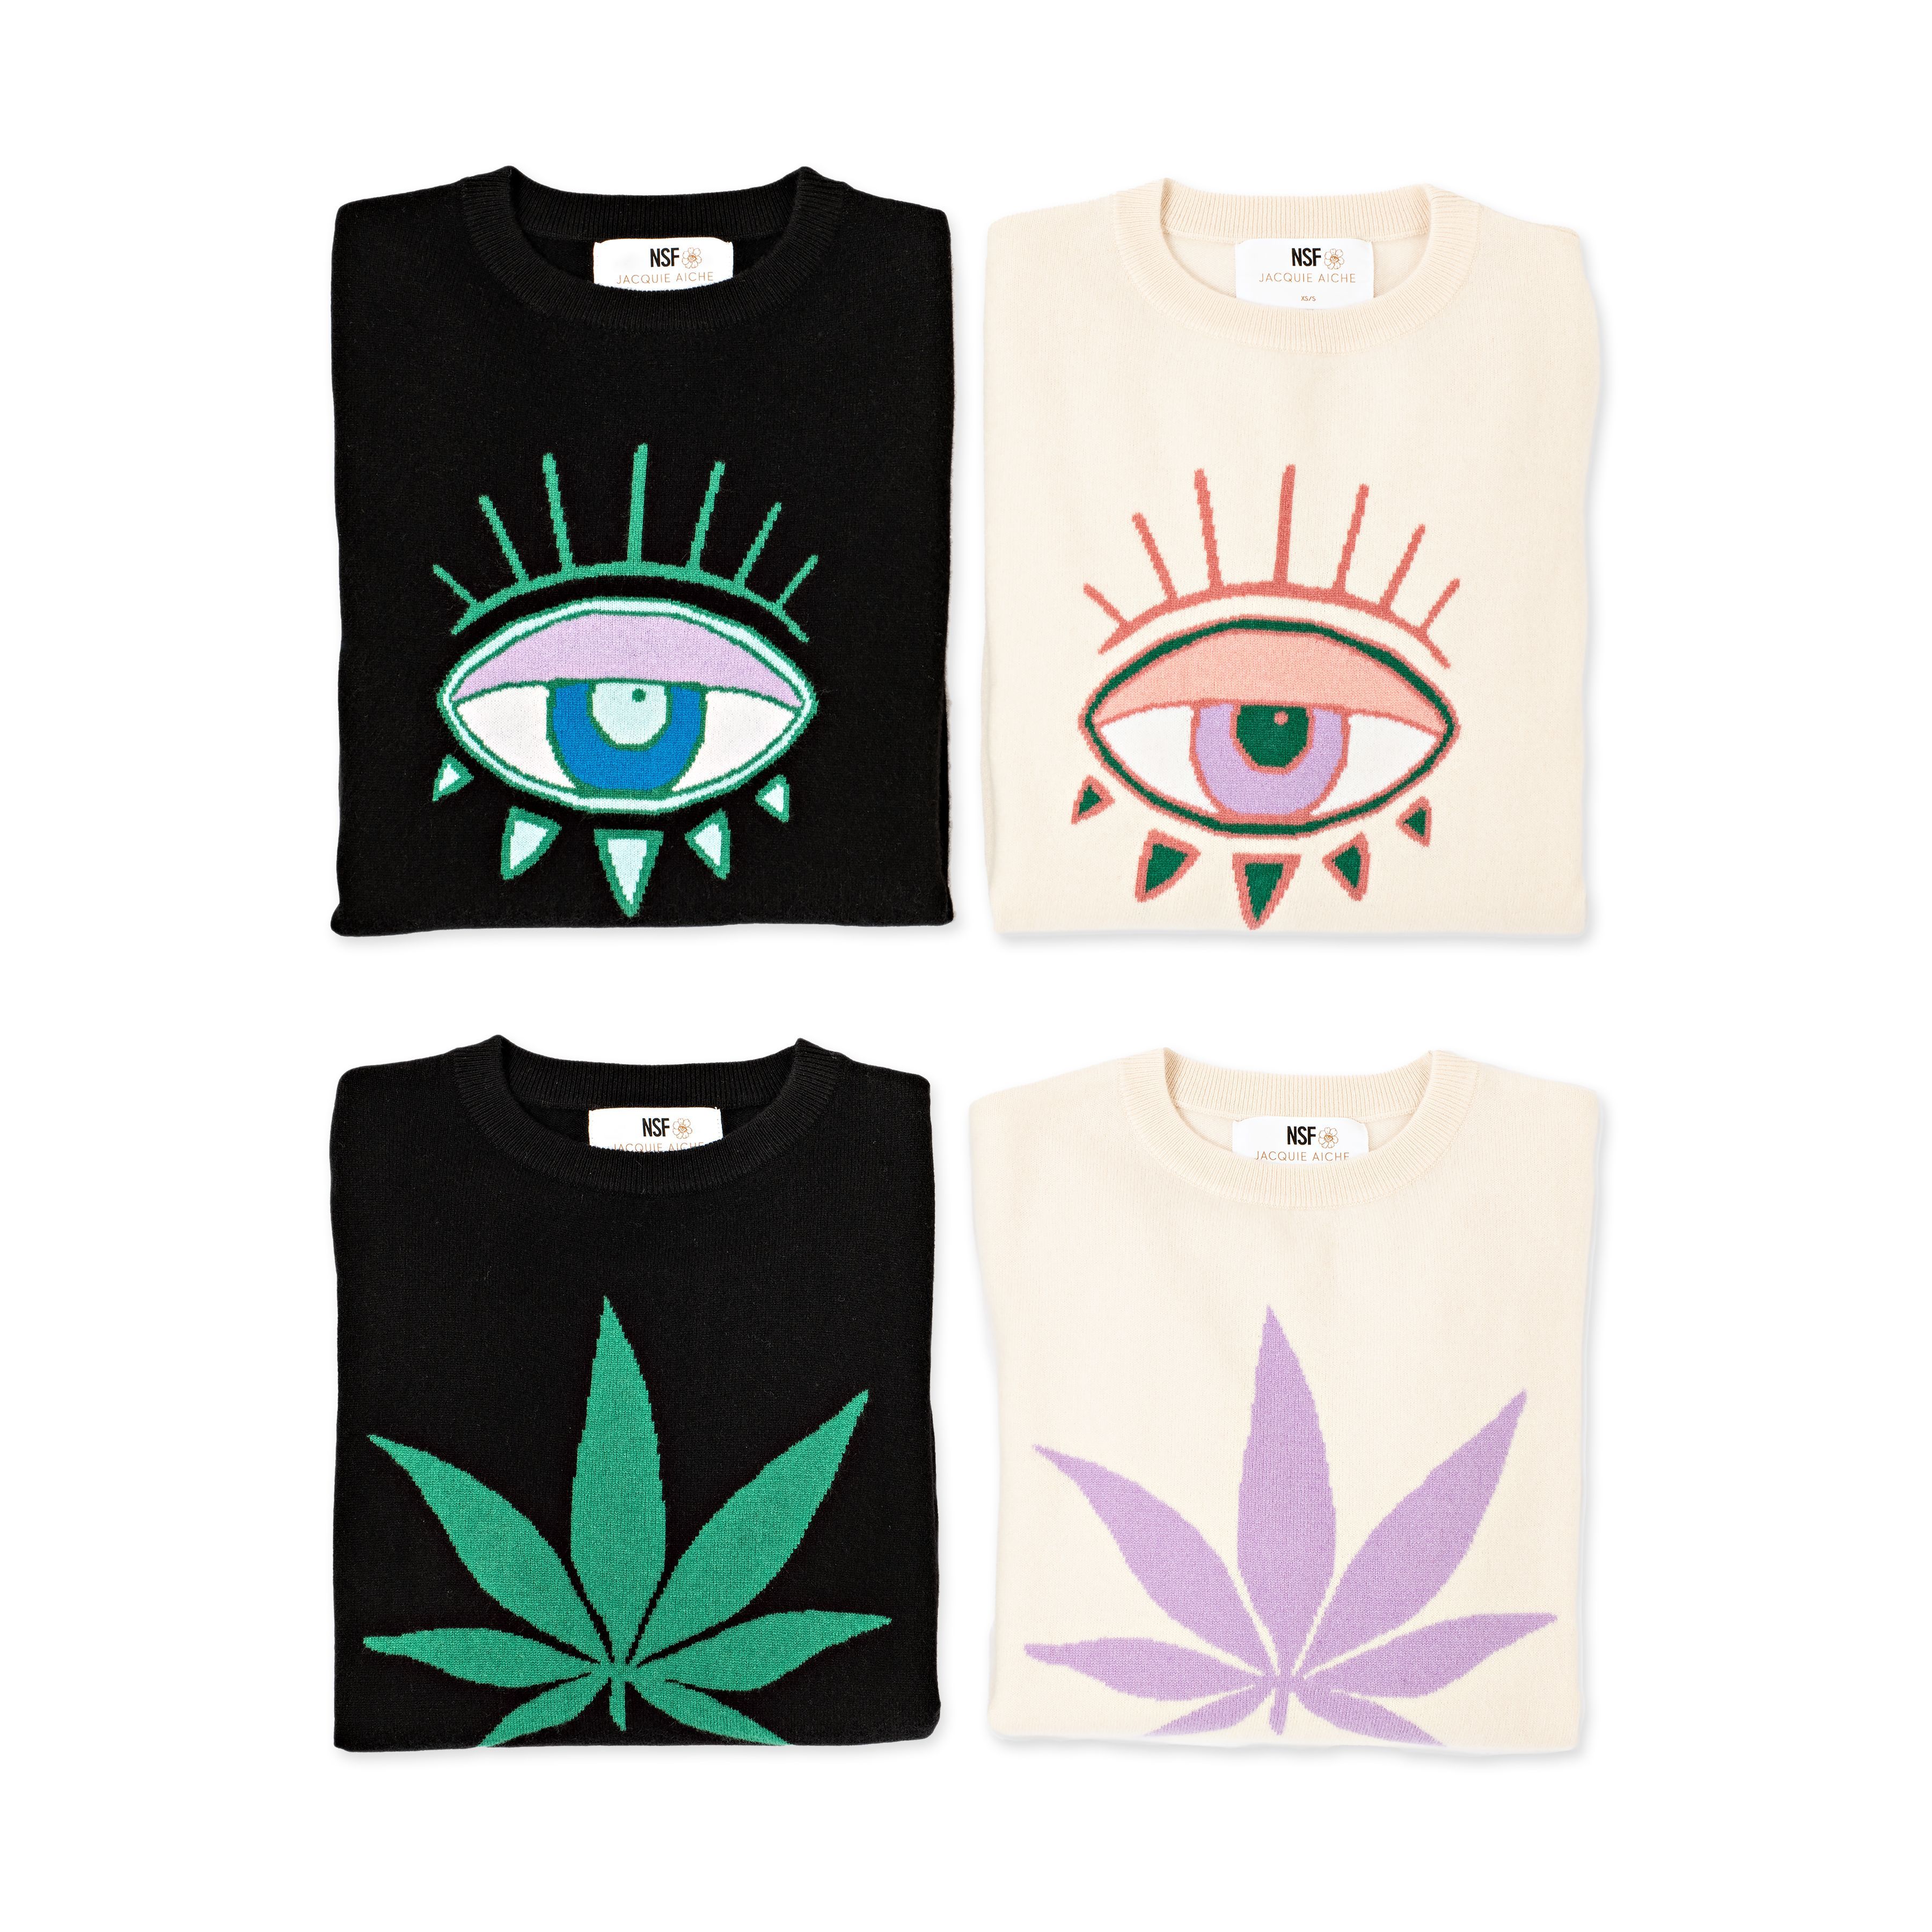 Jacquie Aiche and NSF Continue Partnership With Trippy Sweaters